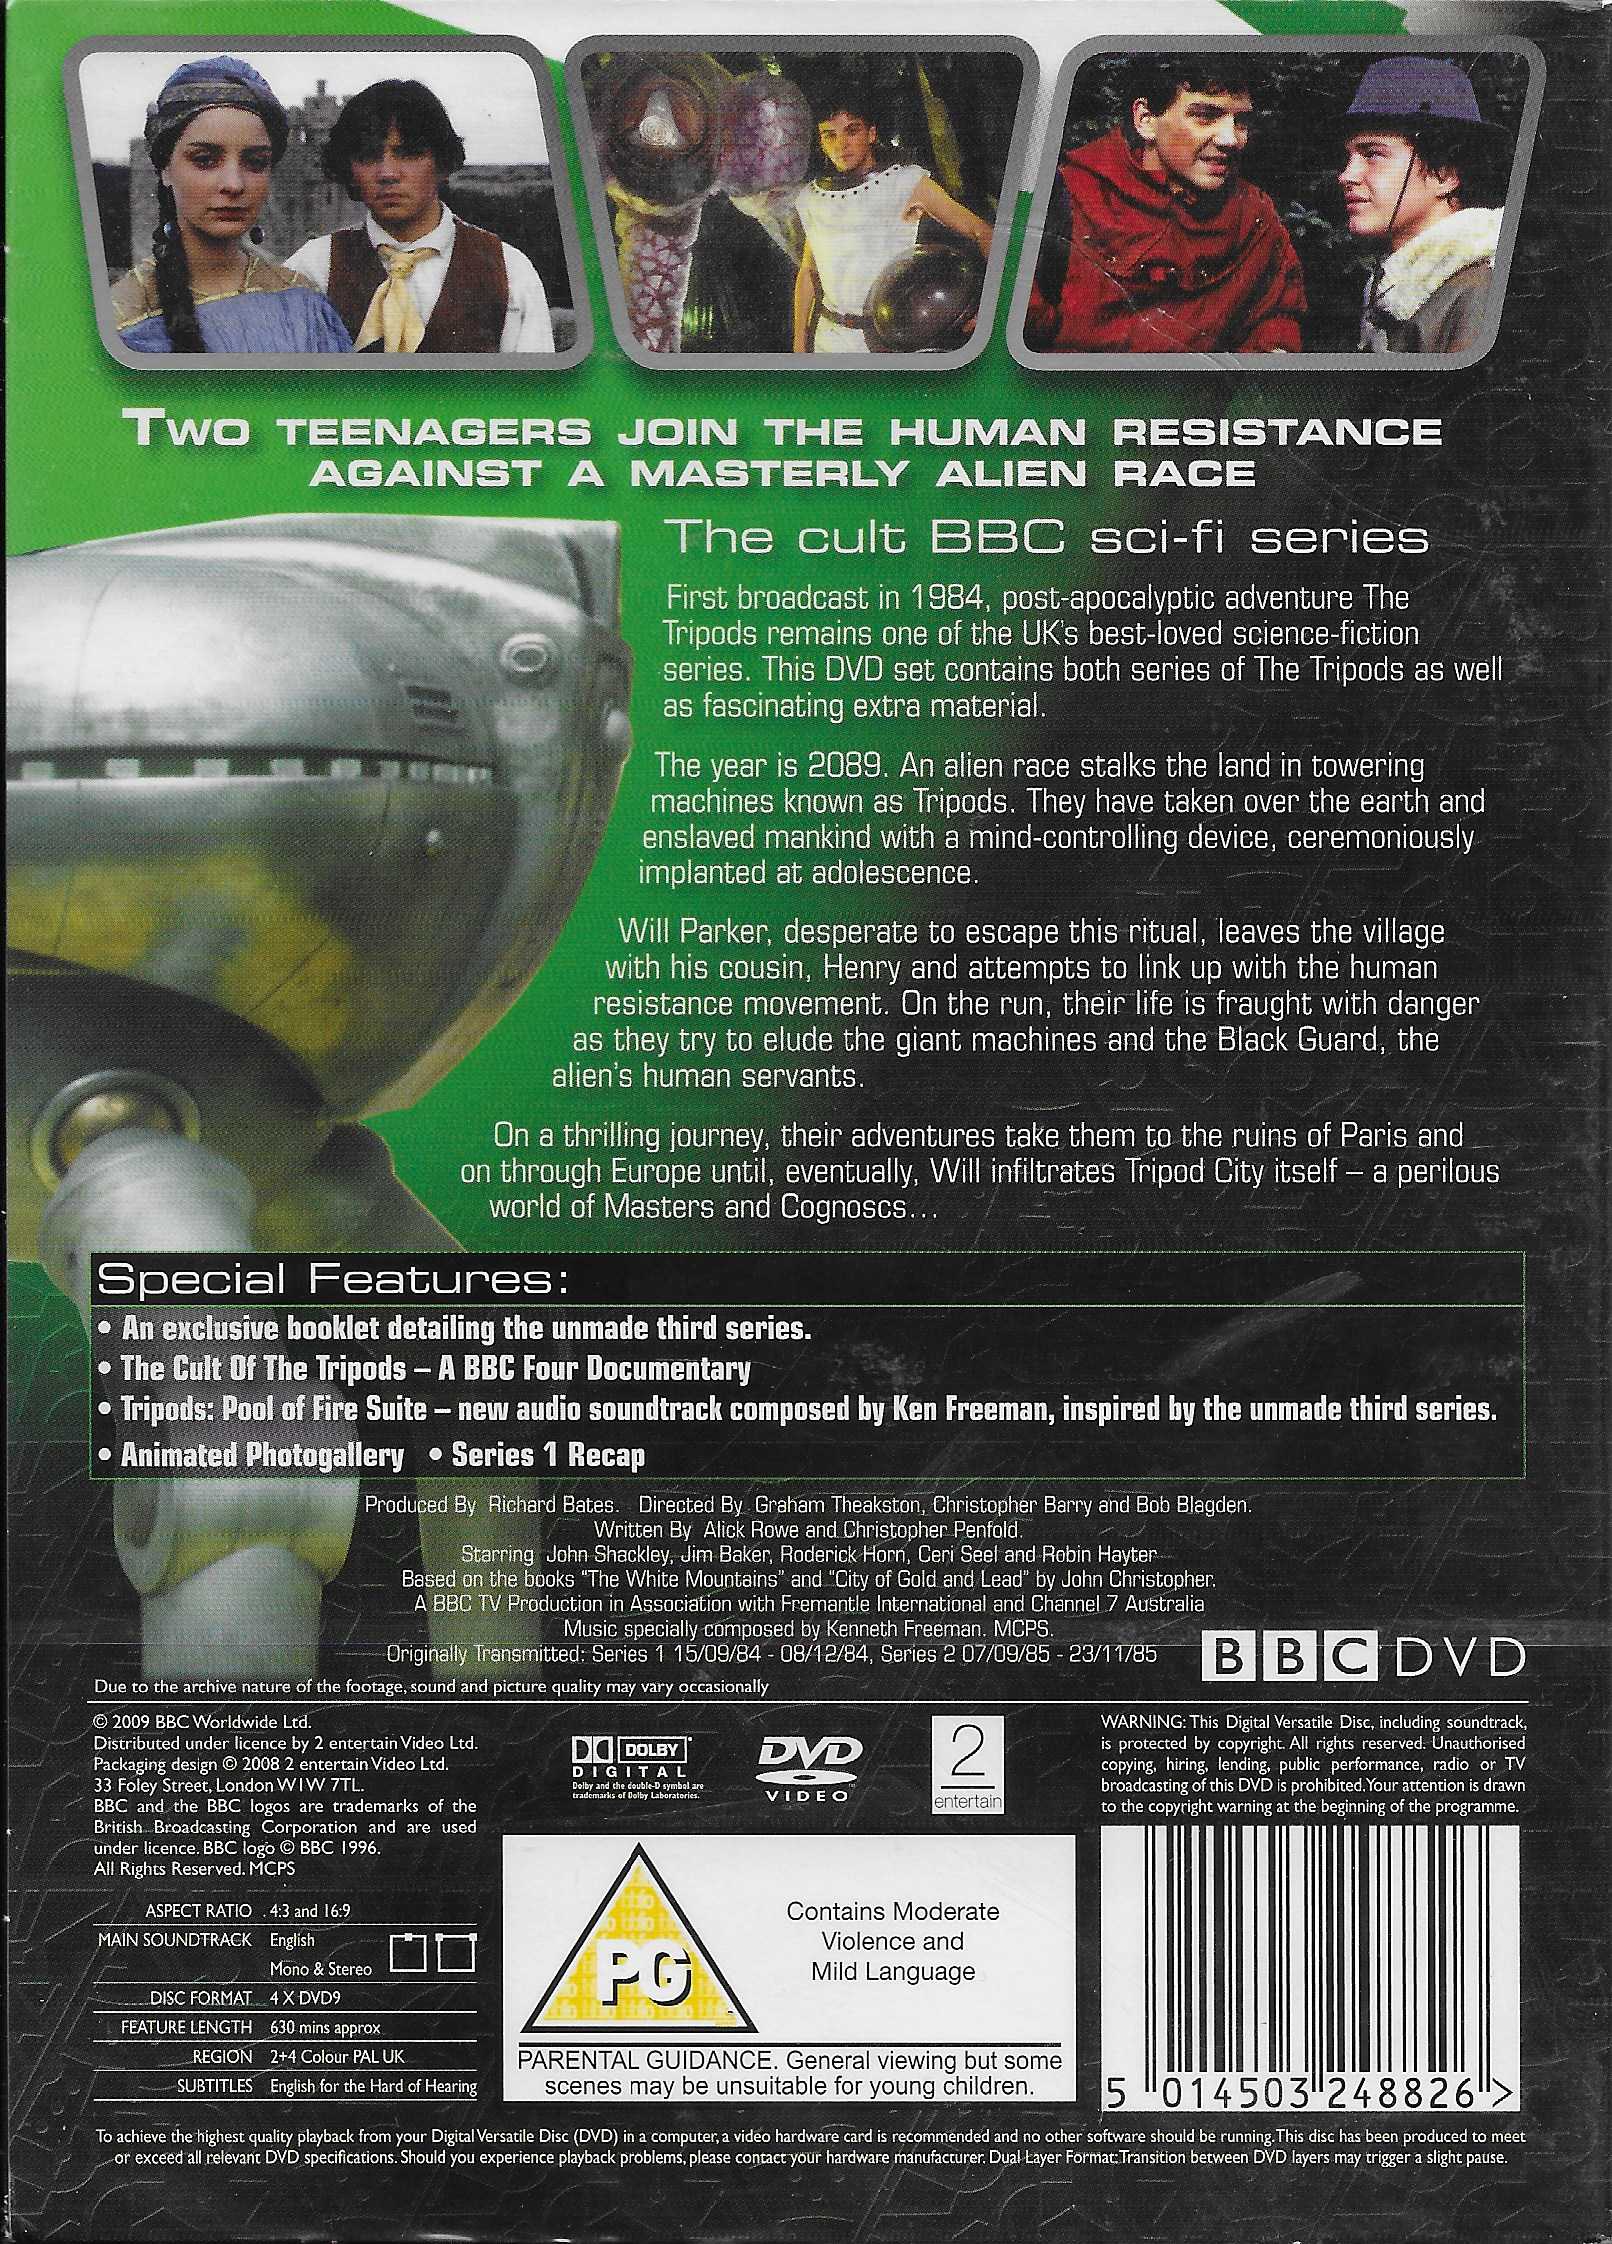 Picture of BBCDVD 2488 The tripods - Series one and two by artist Alick Rowe / Christopher Penfold from the BBC records and Tapes library